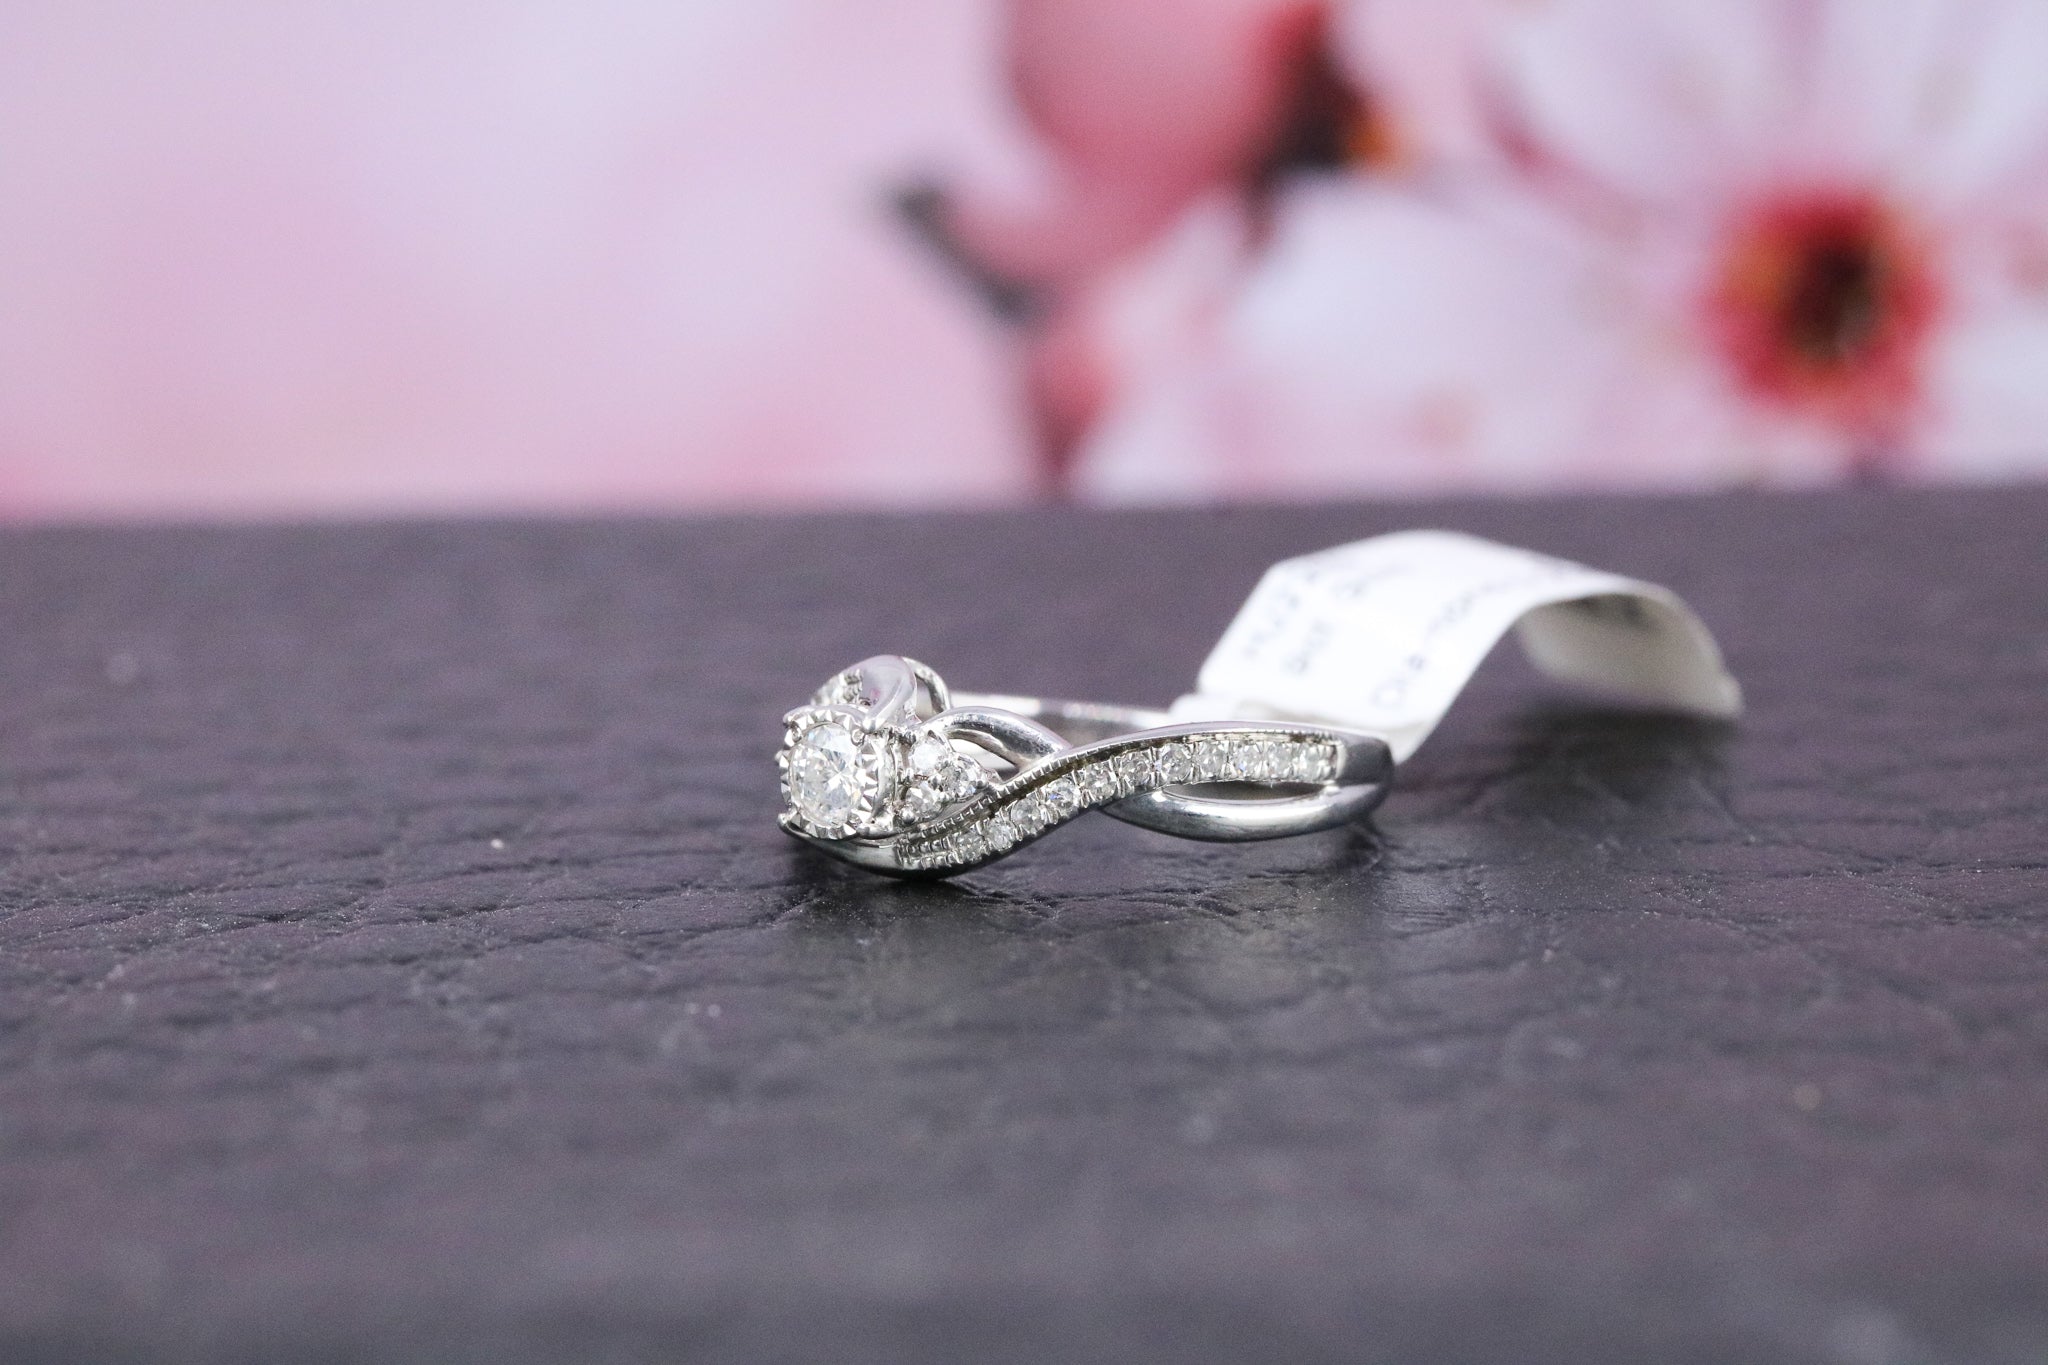 9ct White Gold Diamond Ring - HJ2269 - Hallmark Jewellers Formby & The Jewellers Bench Widnes